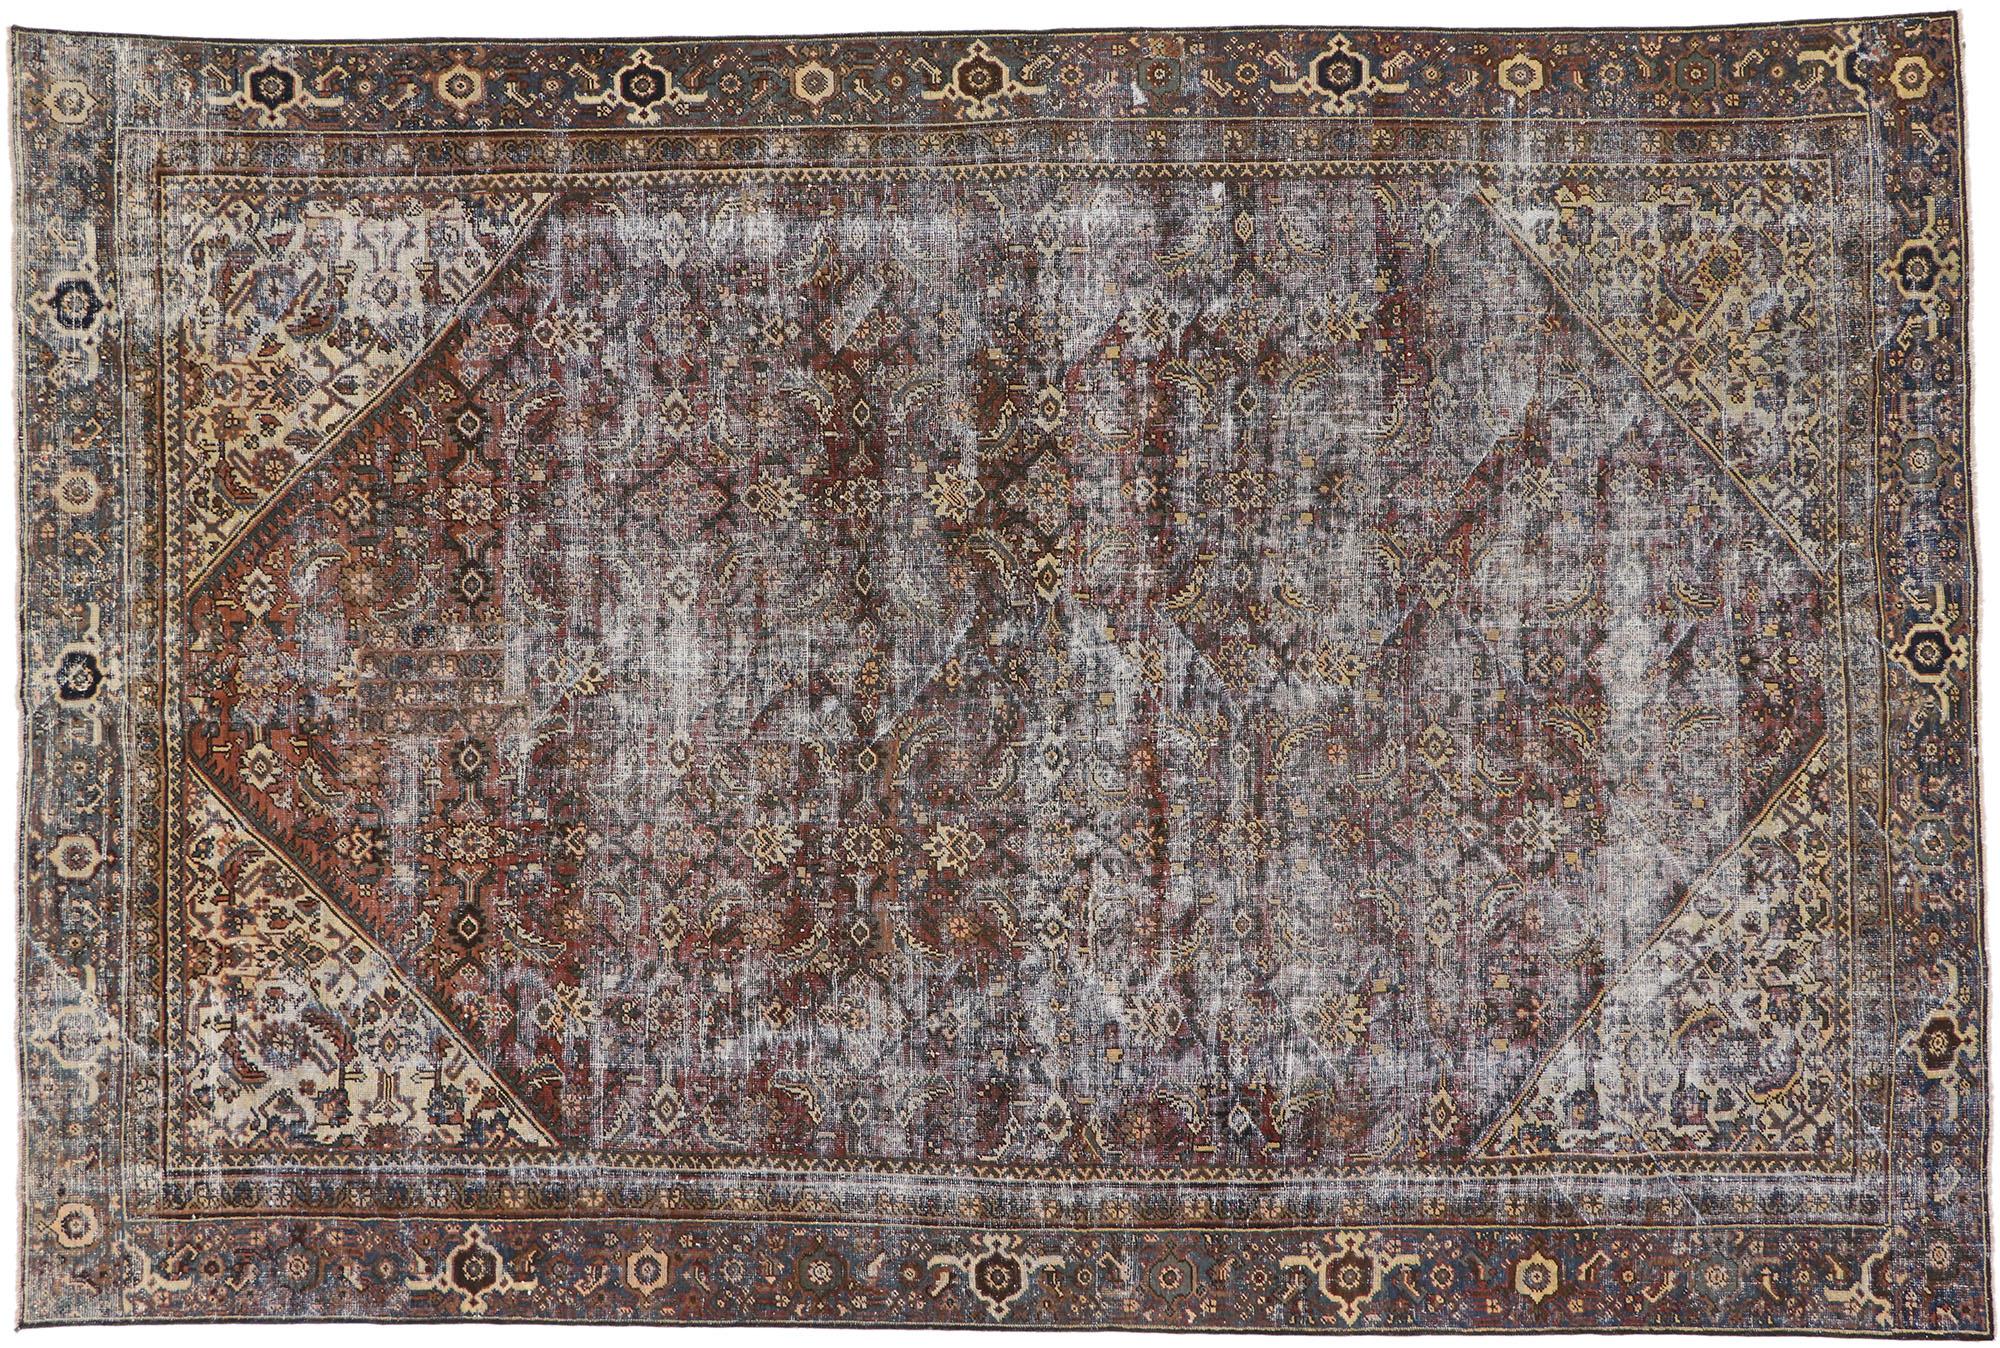  Distressed Antique Persian Mahal Rug with Traditional English Rustic Style  6